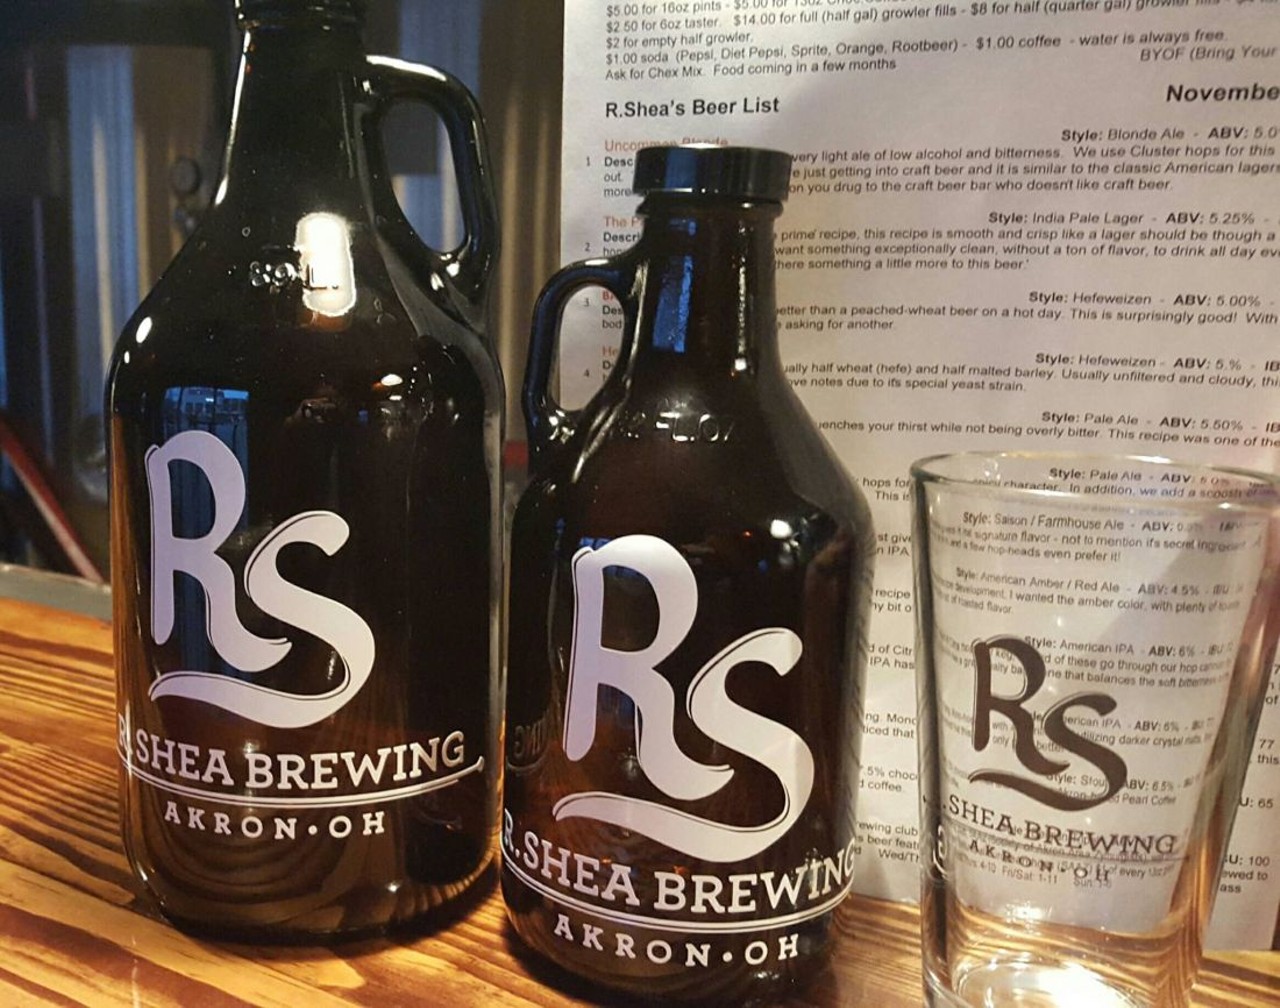  R. Shea Brewing
1662 Merriman Rd., Akron
Located in Akron&#146;s Merriman Valley, this brewery, which opened in 2015, is known for the maltiness of its beers and has 12 of them on tap. The West Coast Citra IPA and Dunkelweizen, a darker wheat beer, are two of the standouts. There is a food menu as well, consisting mostly of delicious sandwiches.
Photo via R. Shea Brewing/Facebook